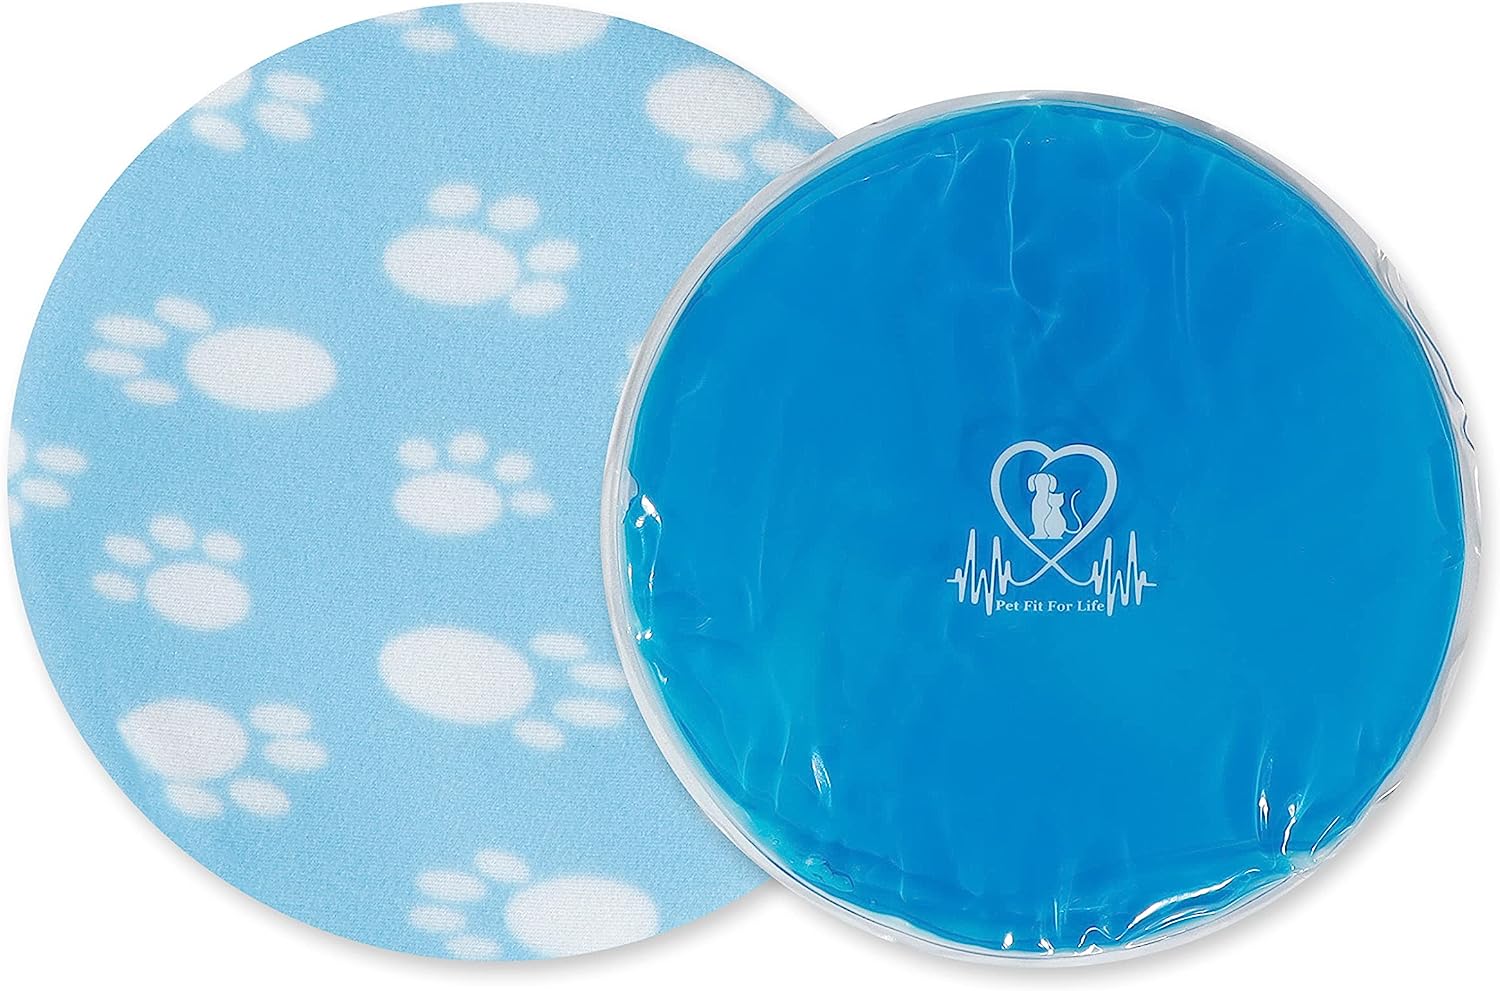 9. Pet Fit For Life Cooling and Heating Pad